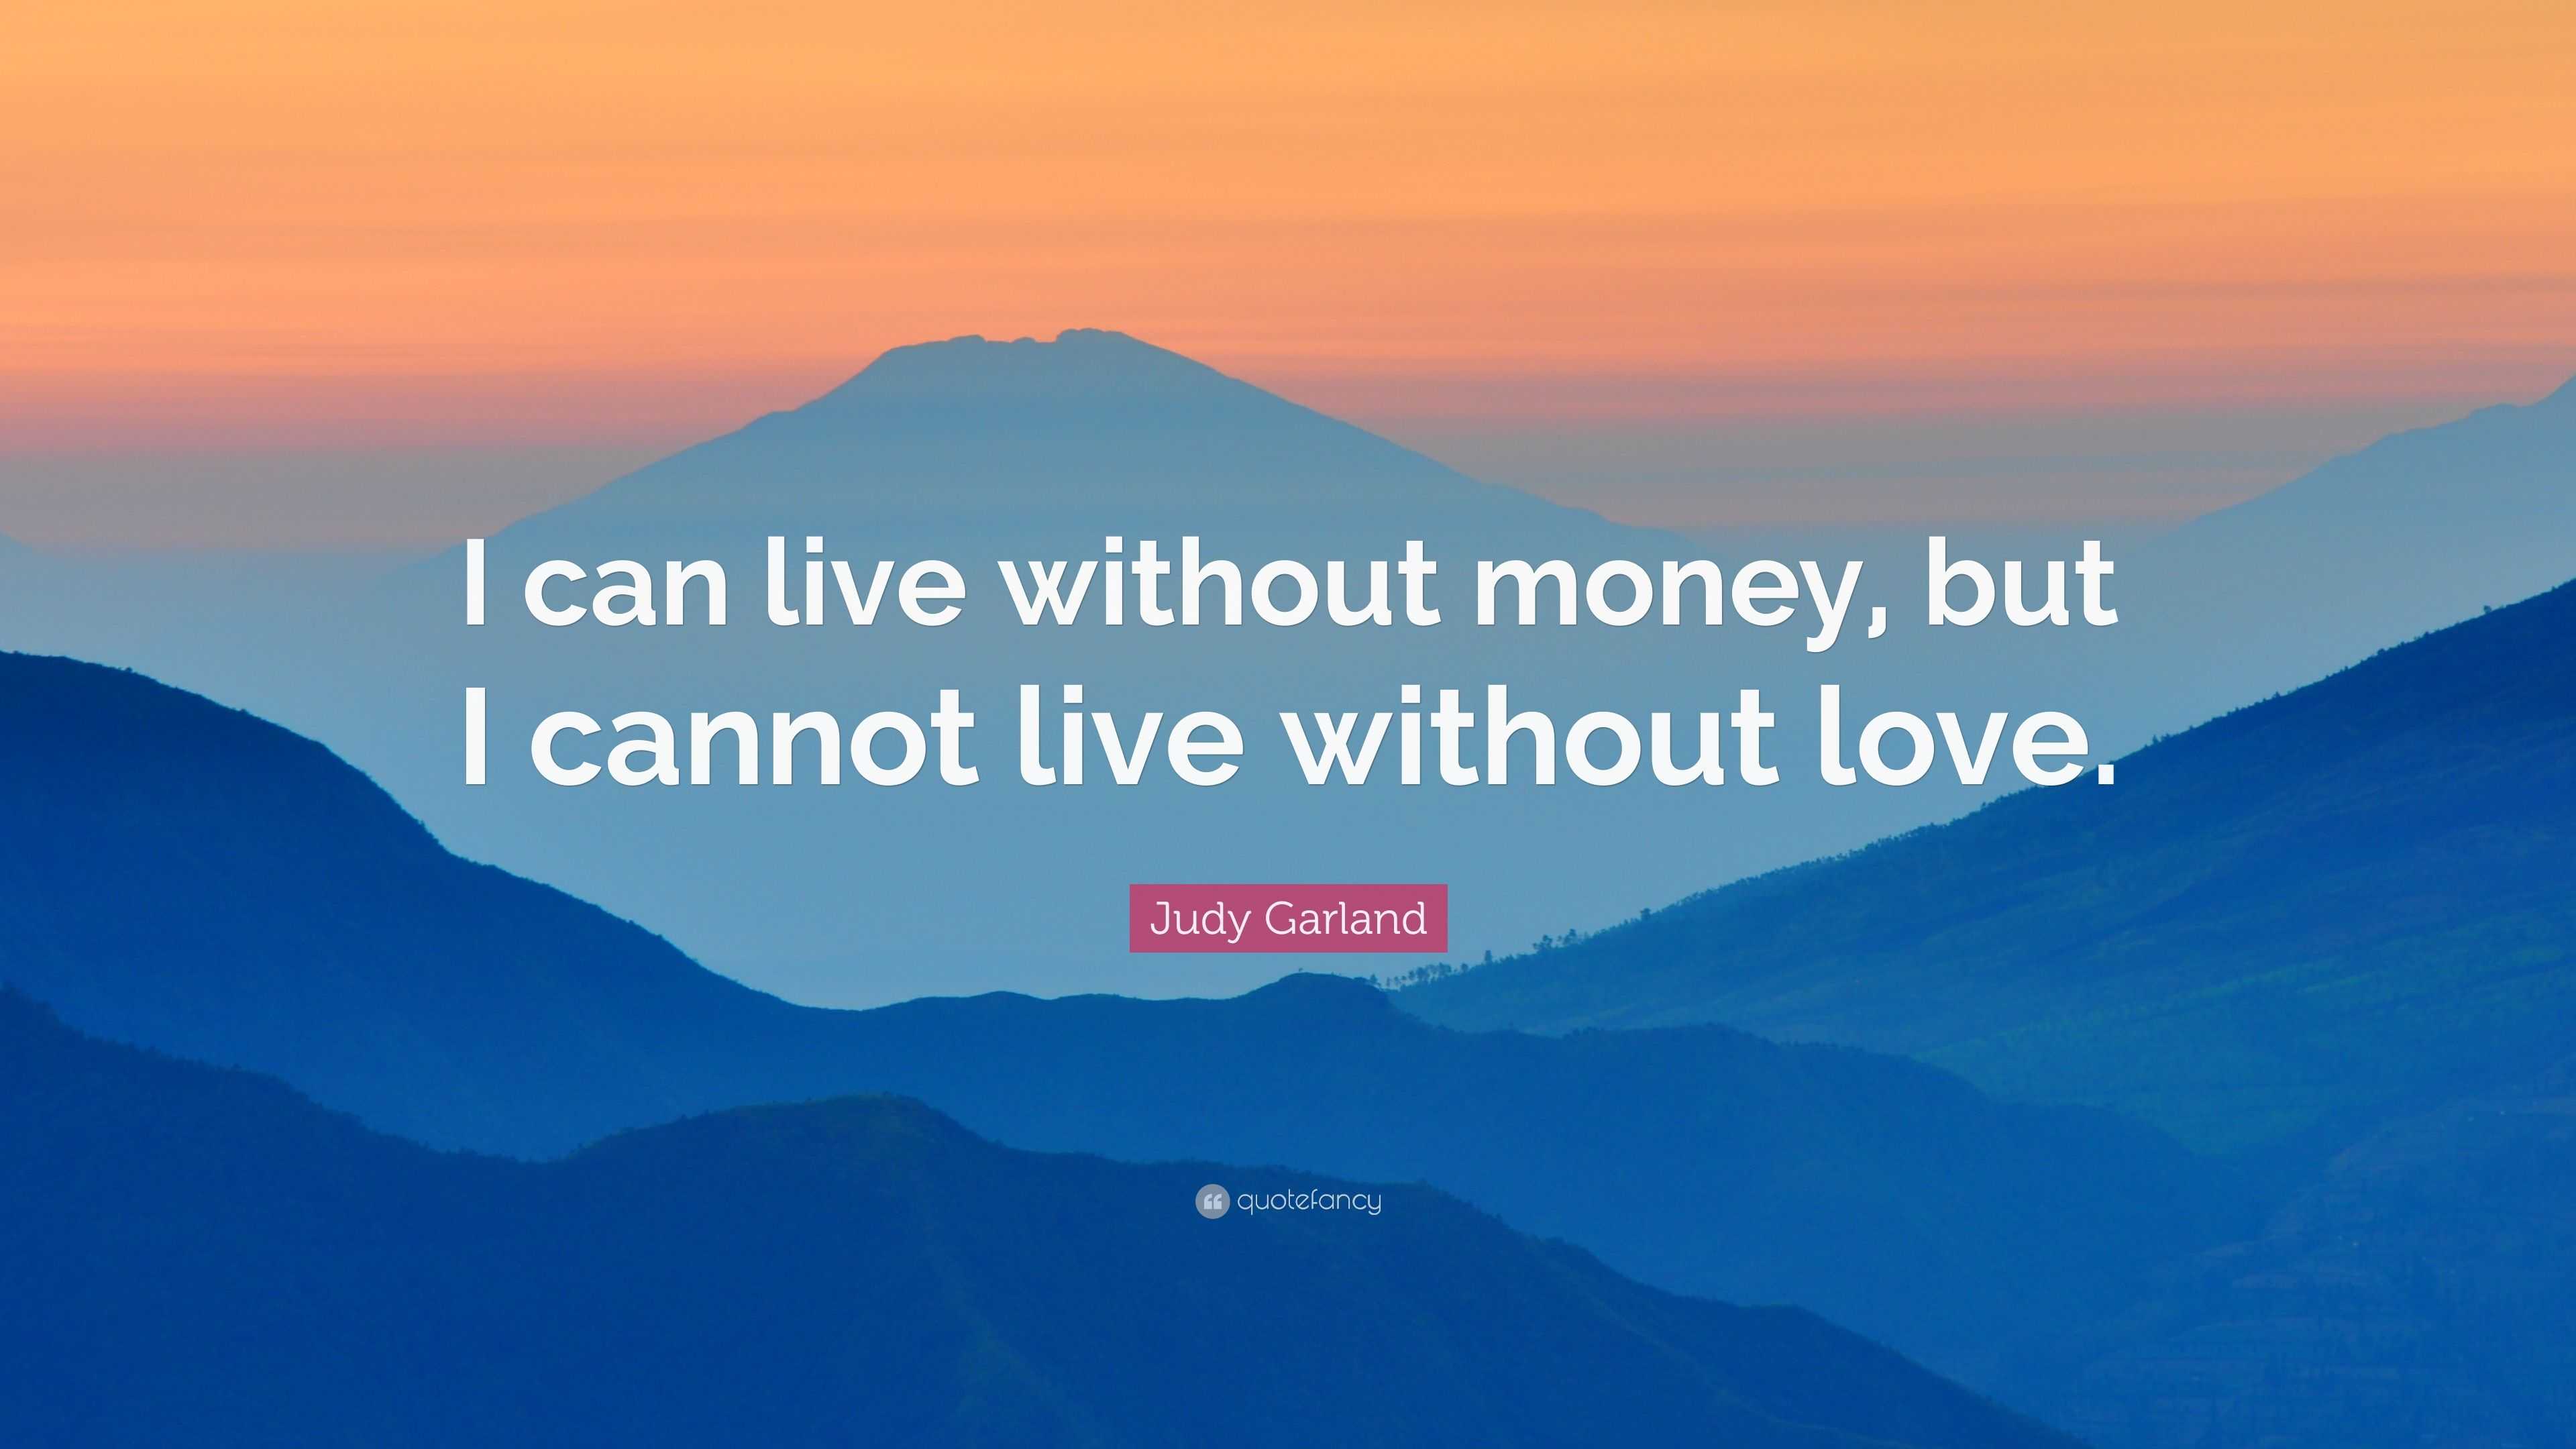 Judy Garland Quote “i Can Live Without Money But I Cannot Live Without Love ”